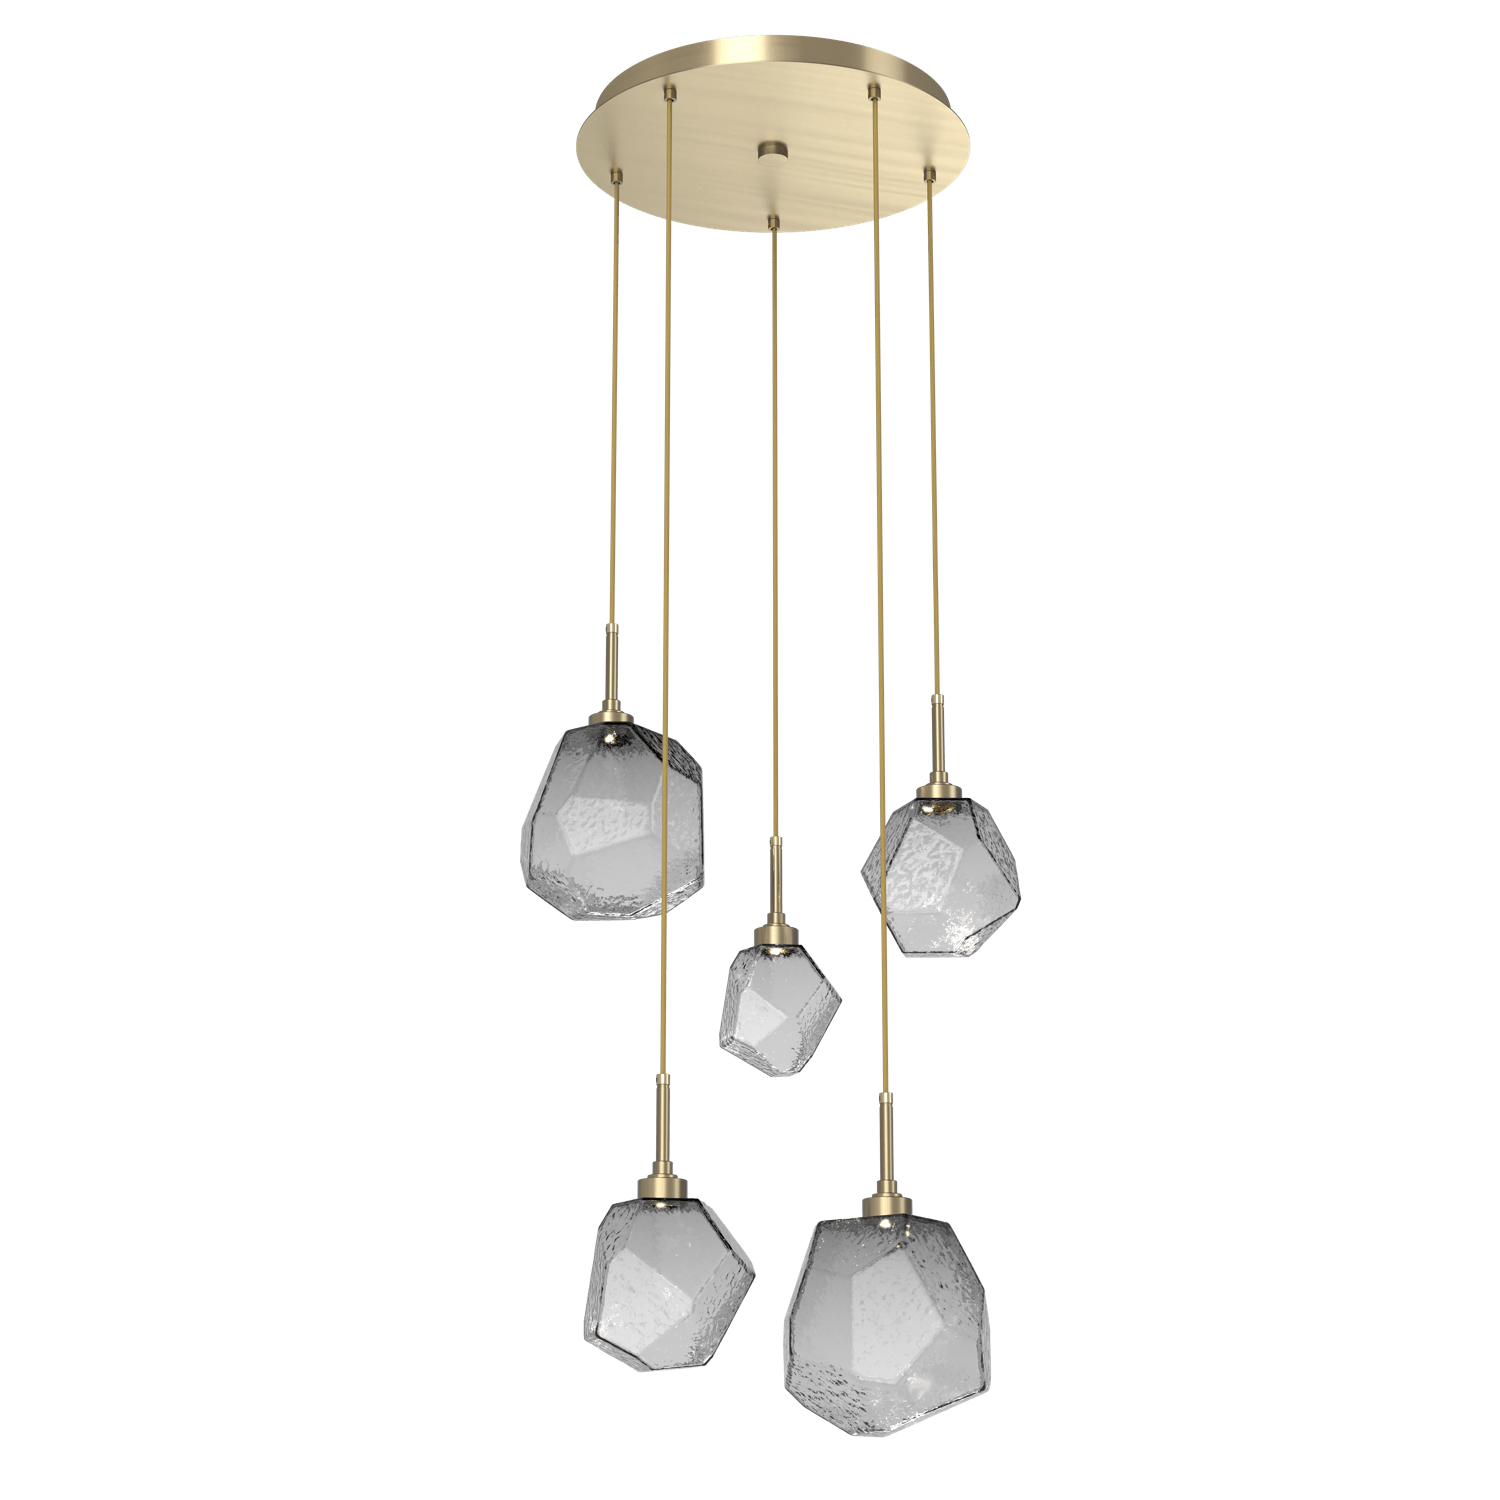 CHB0039-05-HB-S-Hammerton-Studio-Gem-5-light-round-pendant-chandelier-with-heritage-brass-finish-and-smoke-blown-glass-shades-and-LED-lamping